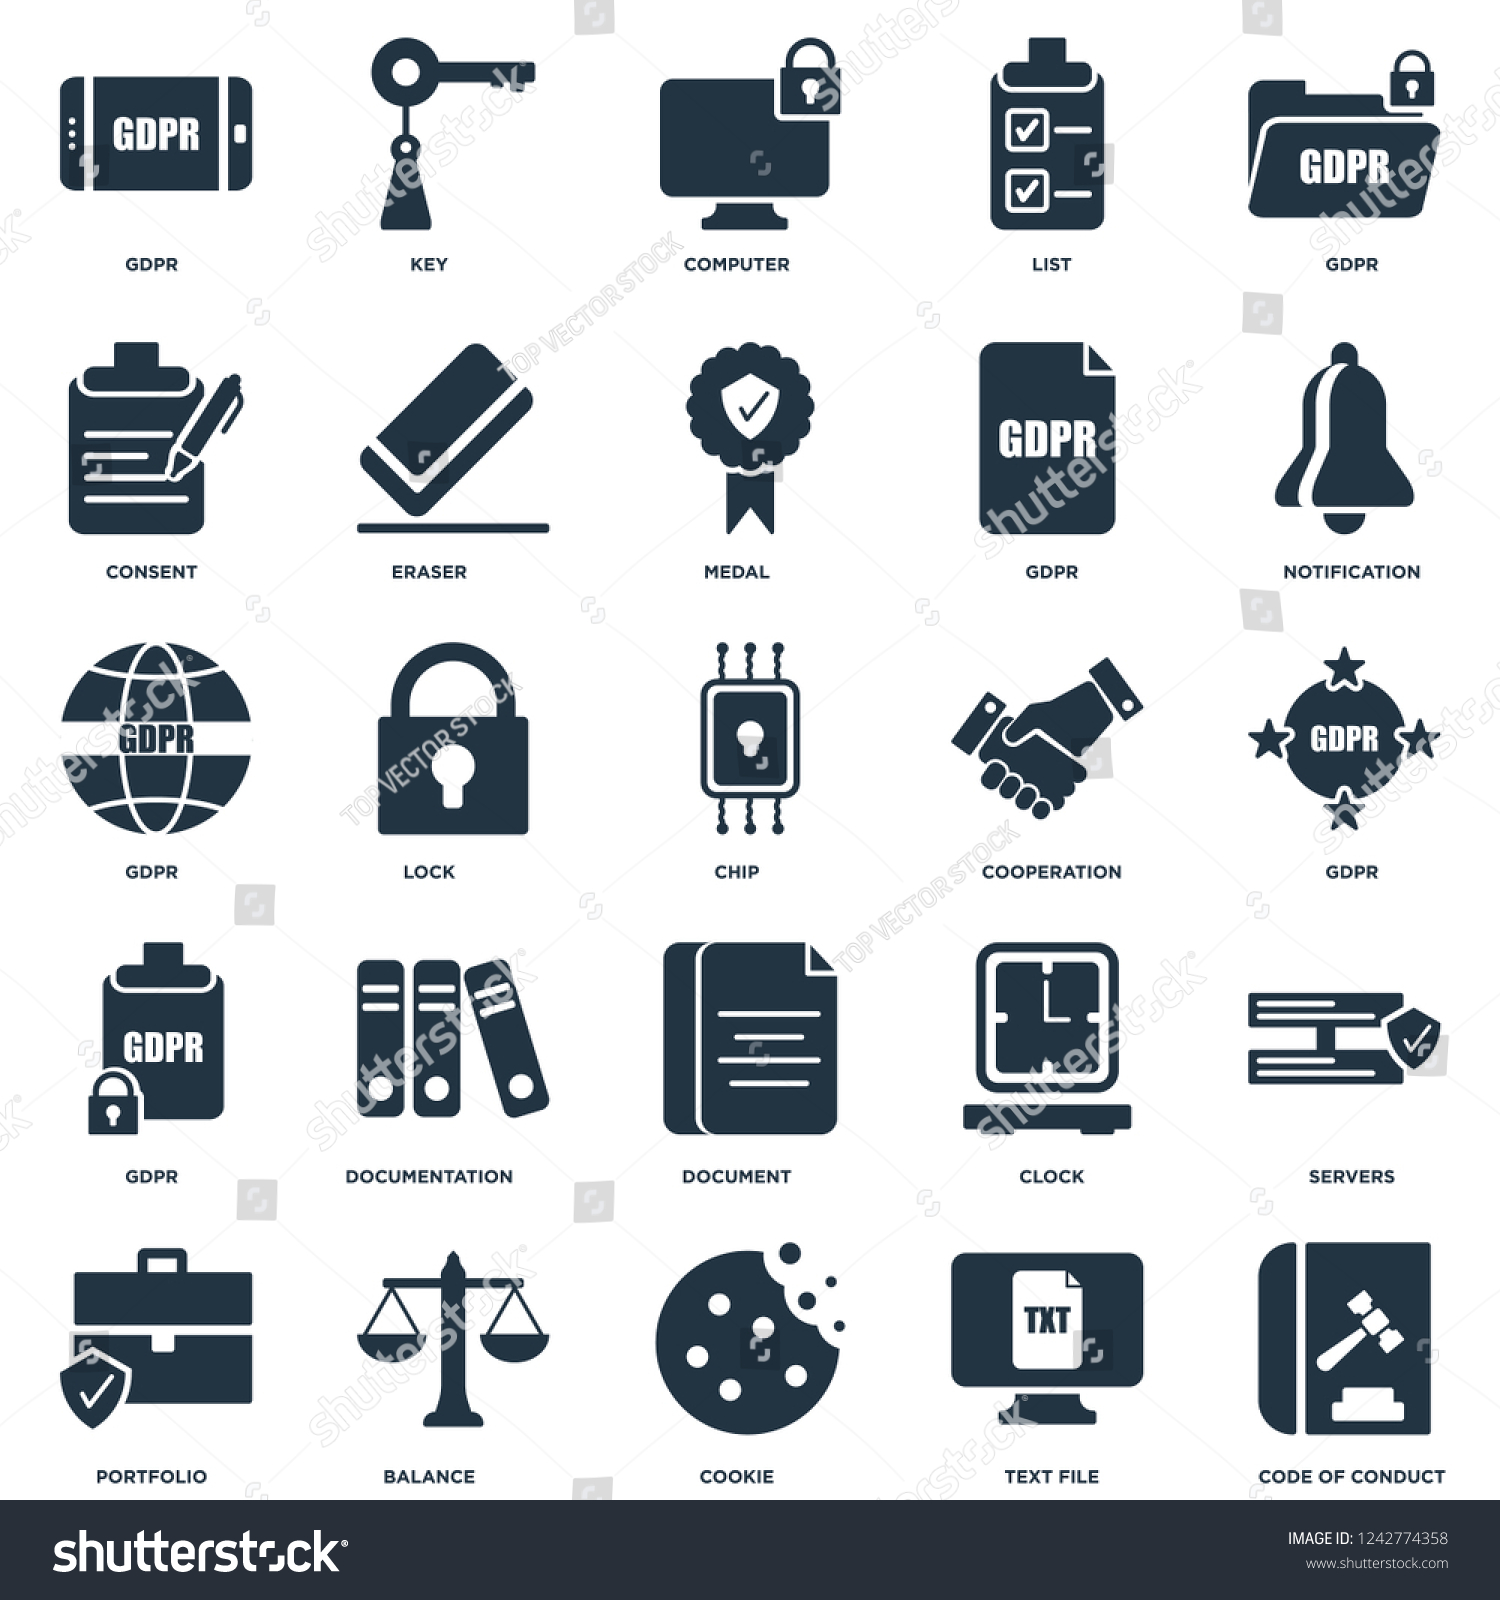 SVG of Elements Such As Code of conduct, GDPR, Notification, Key, Portfolio, Eraser, Clock, GDPR icon vector illustration on white background. Universal 25 icons set. svg